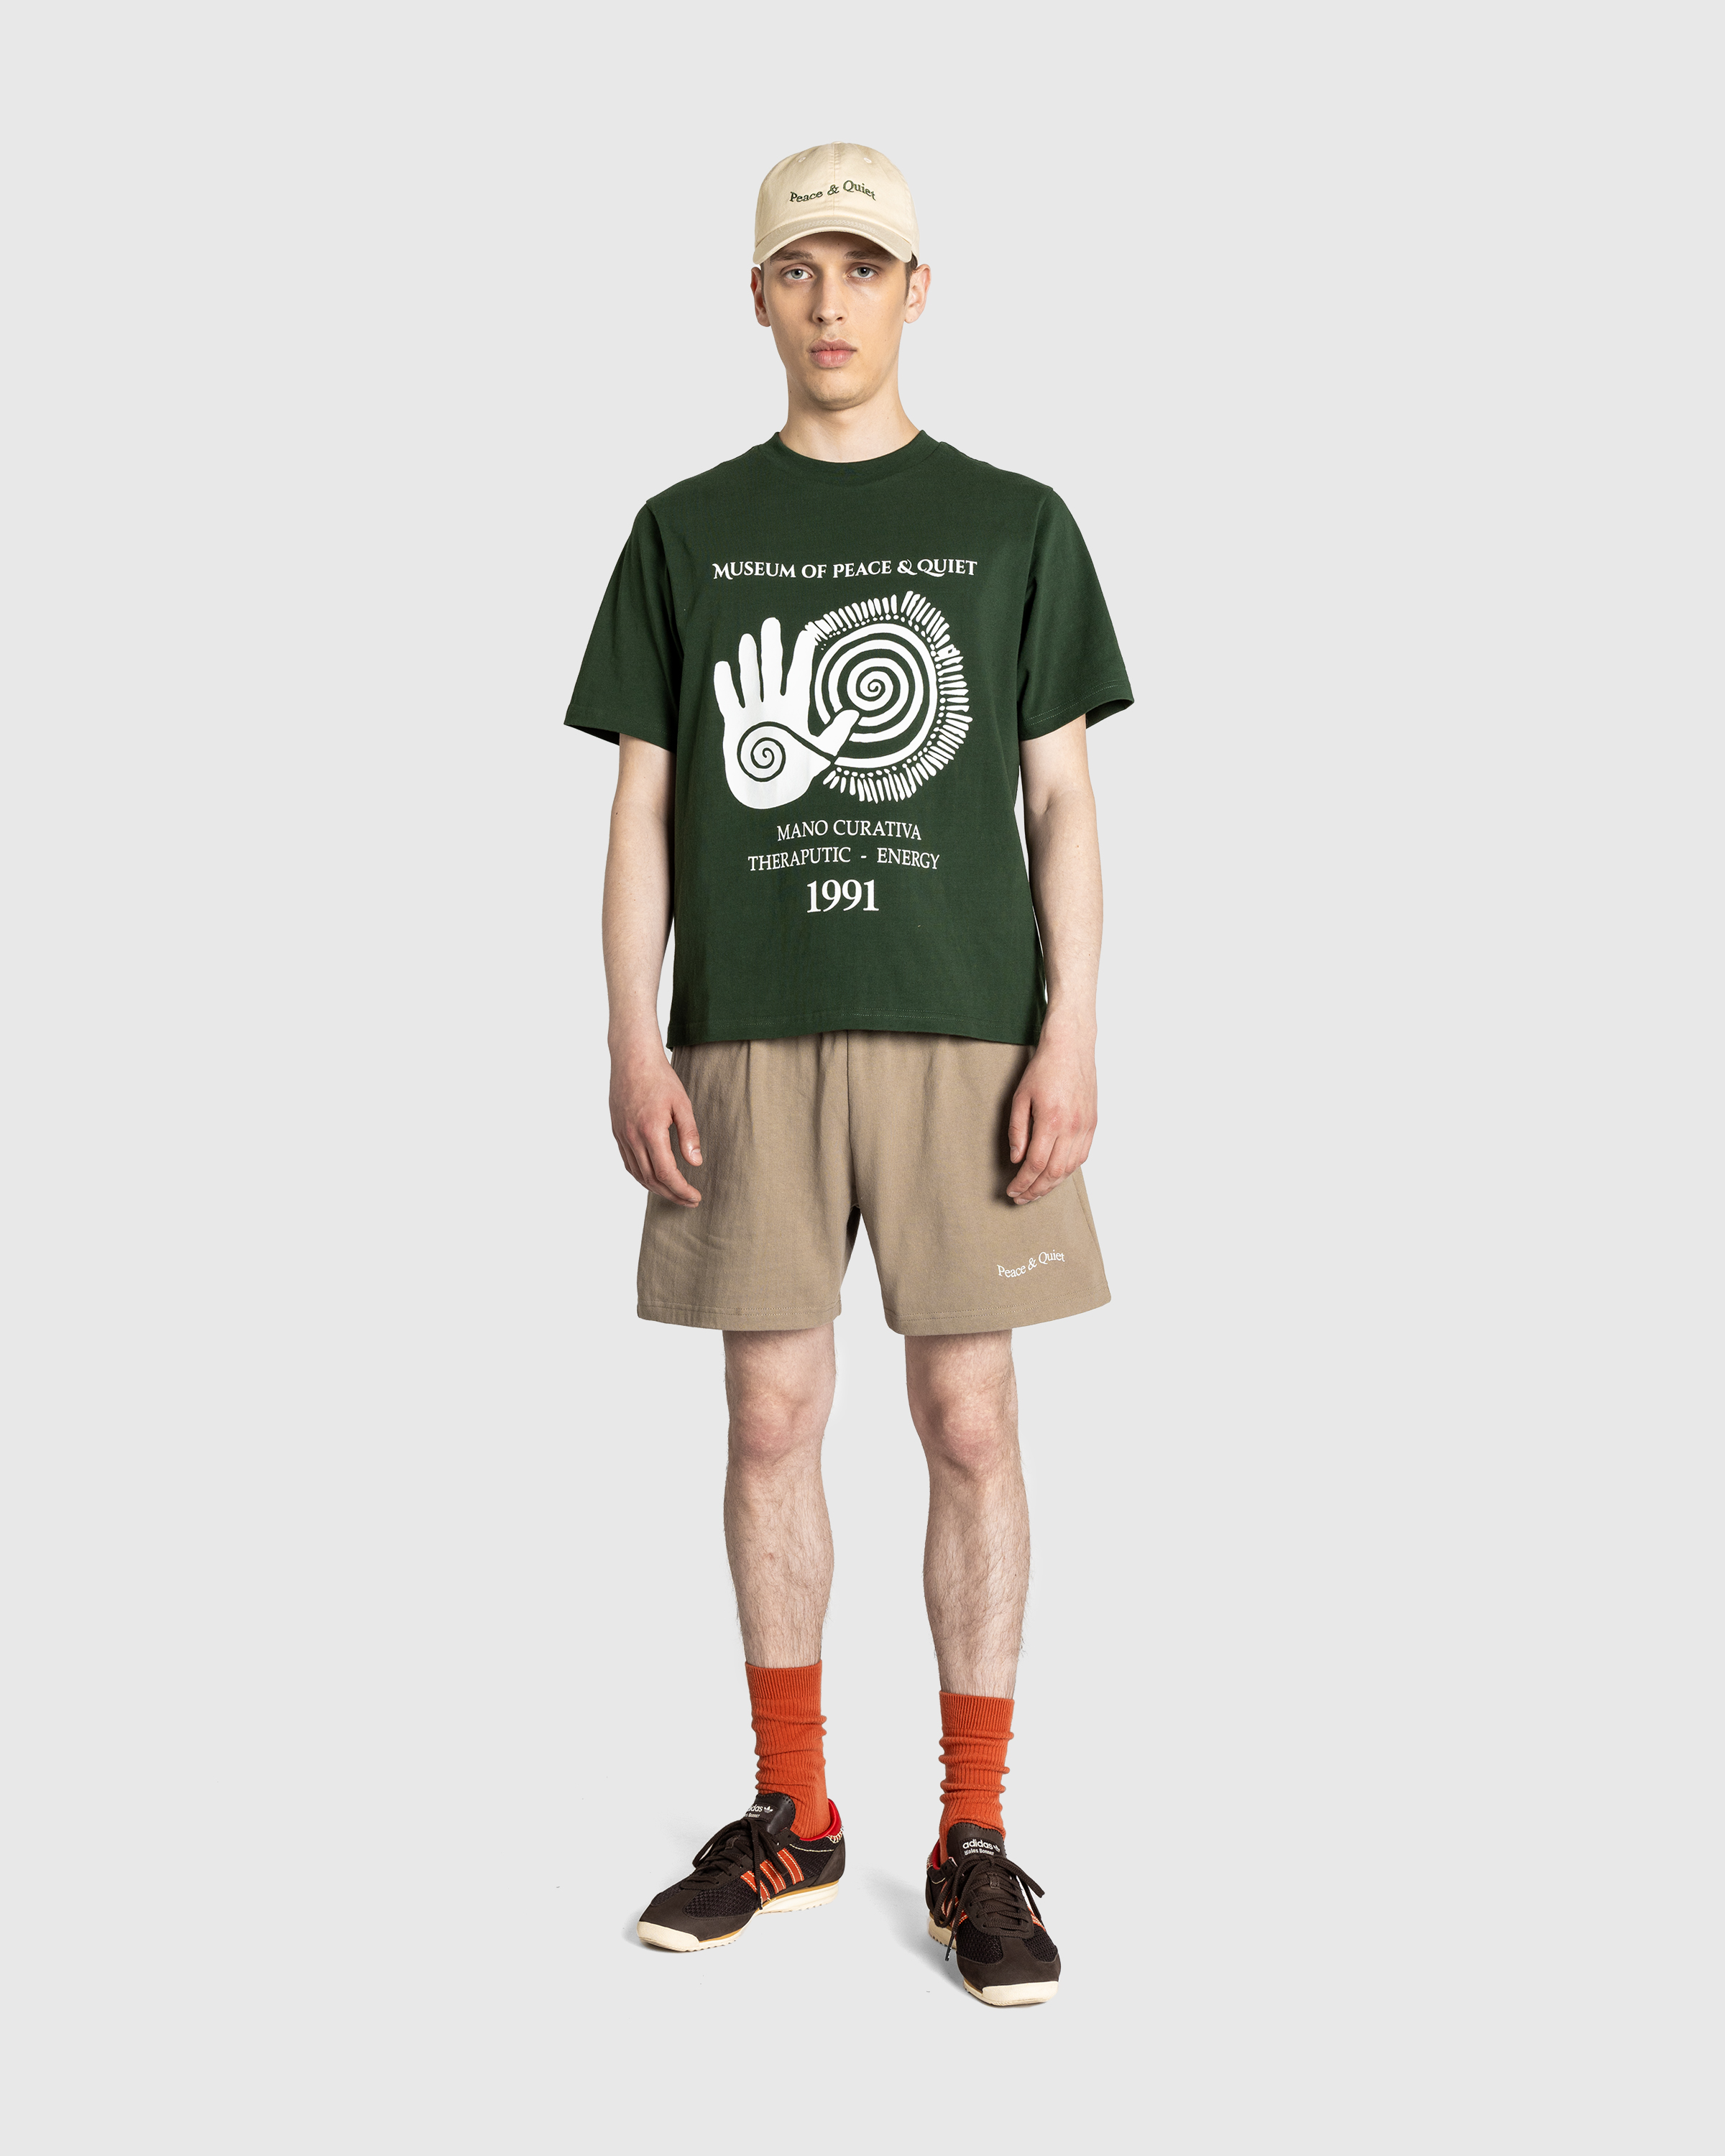 Museum of Peace & Quiet – Mano Curativa T-Shirt Forest - T-Shirts - Green - Image 3